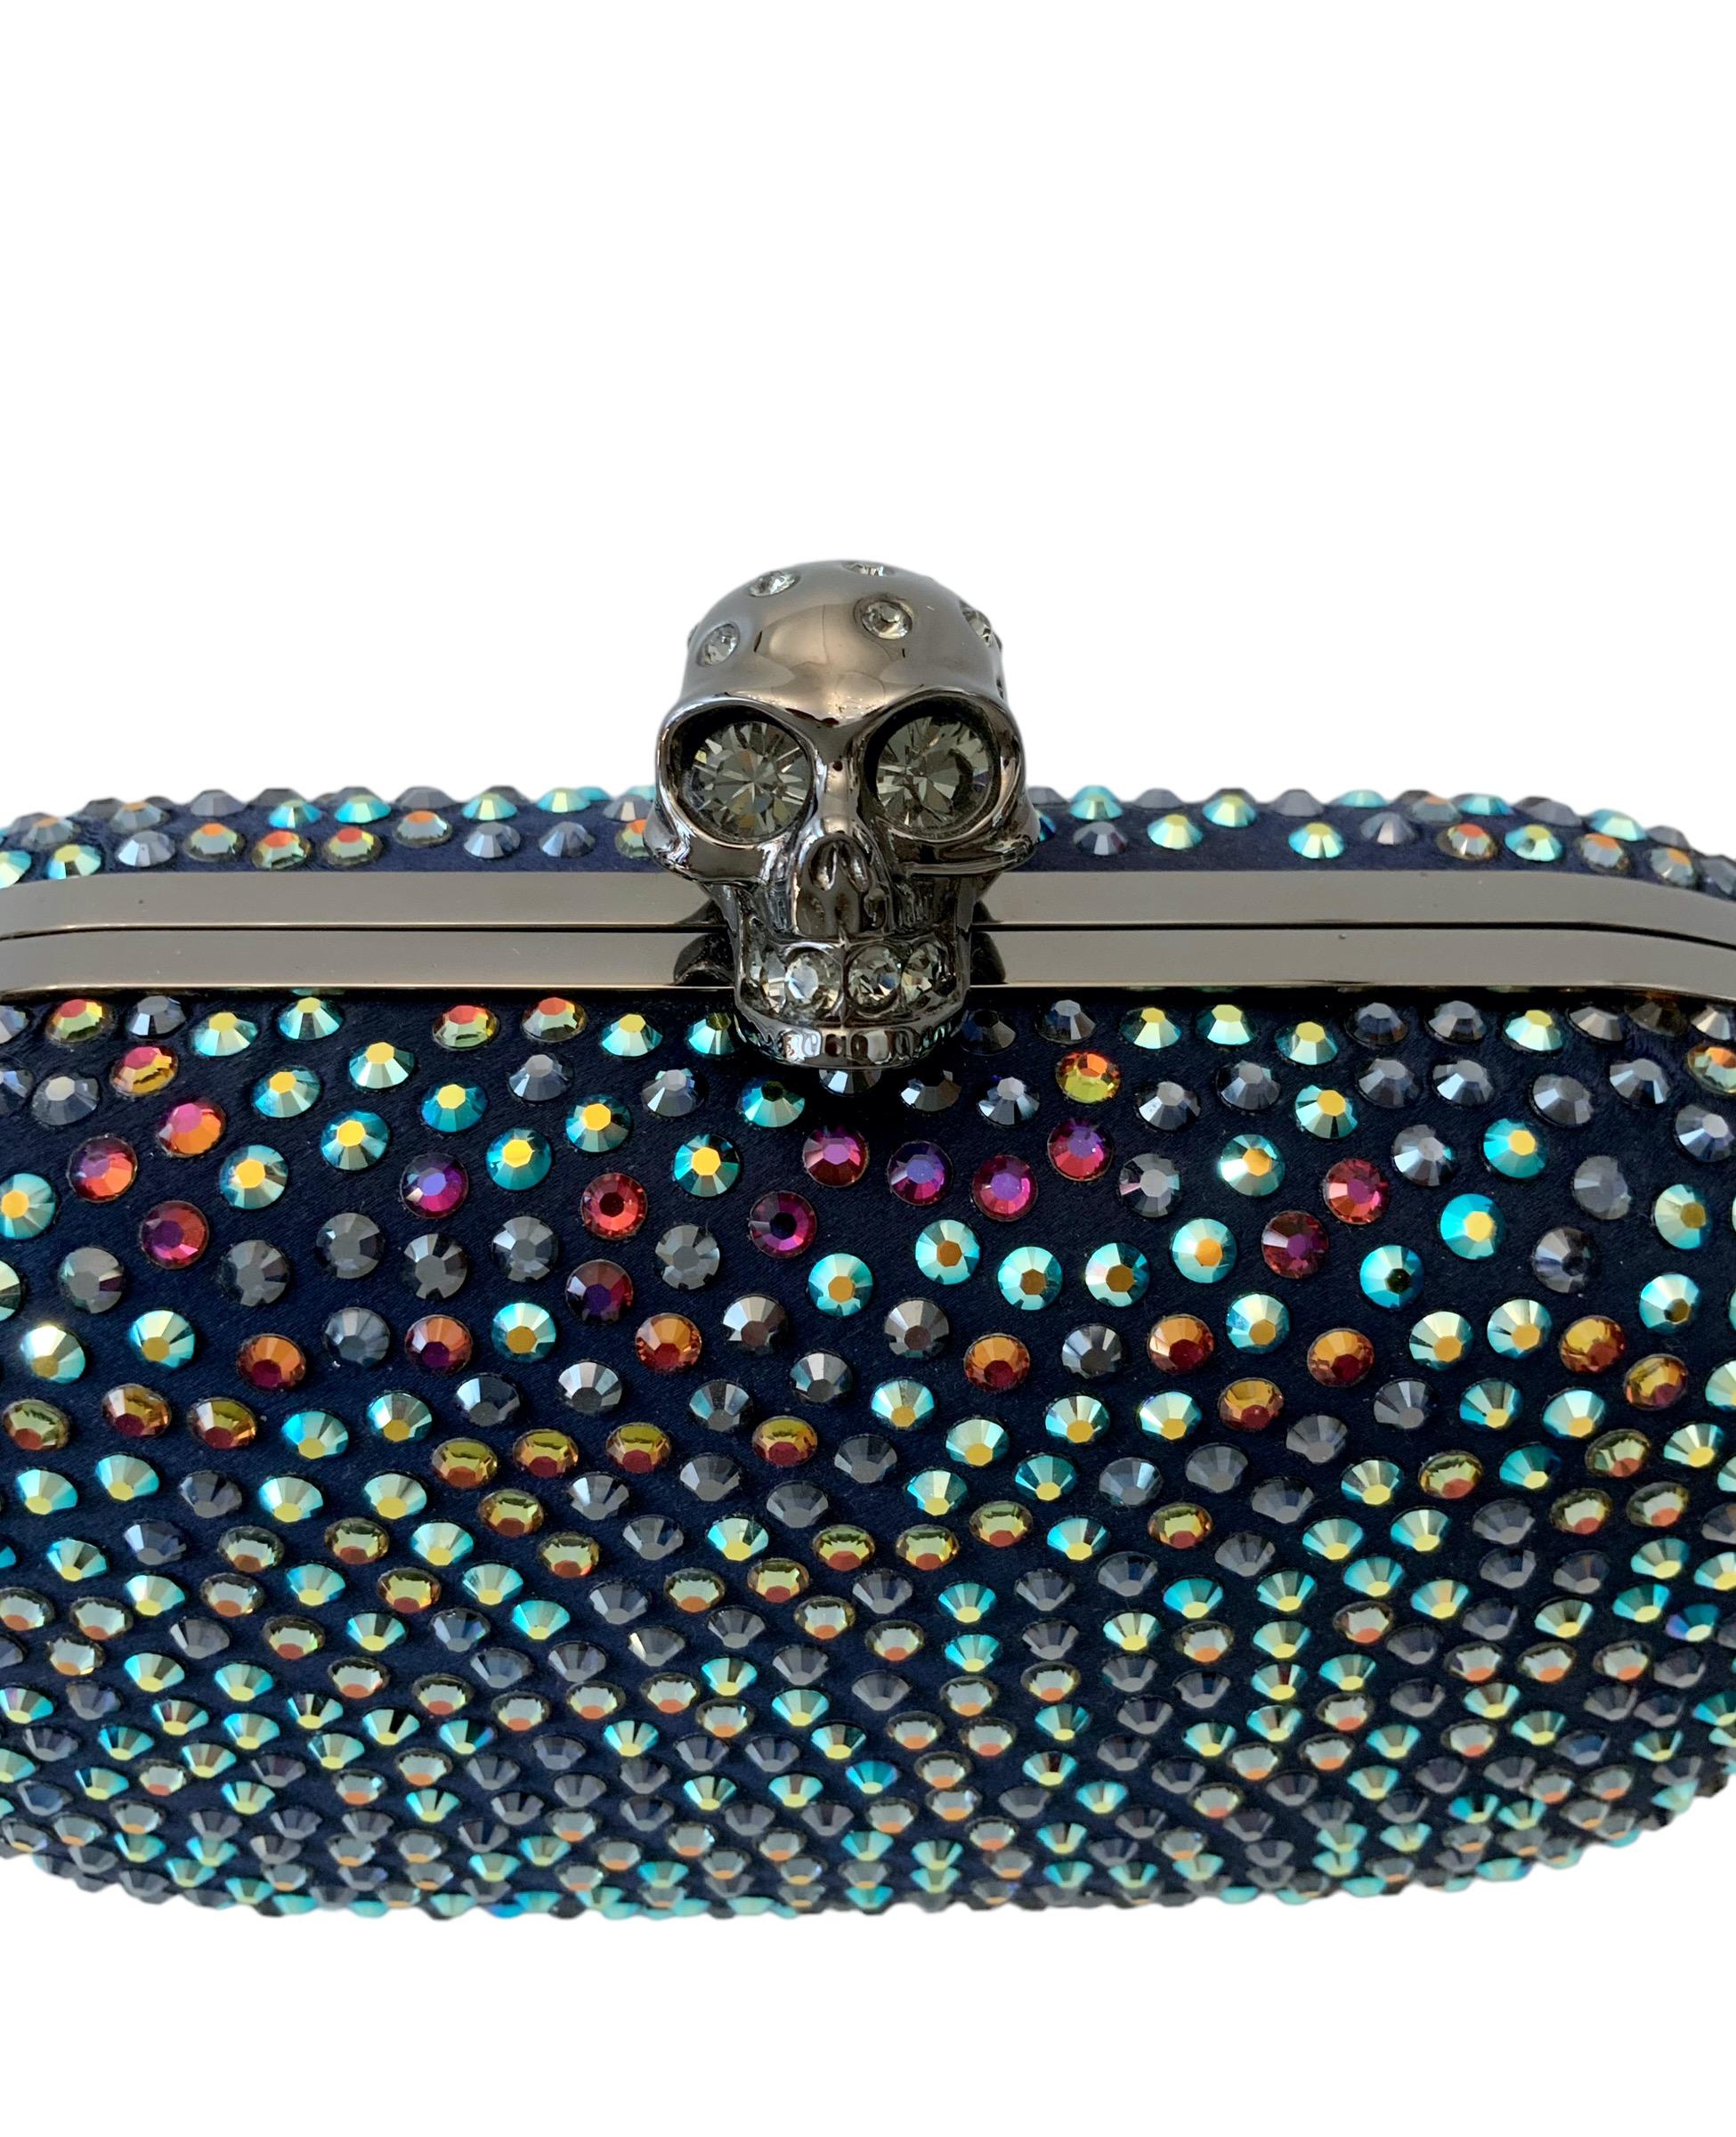 Iconic piece from Alexander McQueen realized with multicolored crystals on navy blue satin.

Material: satin and crystals 
Lining: leather 
Color: navy and multicolor
Hardware: Ruthenium-Finish Metal 
Measurements: 16cms x 9cms x 6cms - approx. 6.3